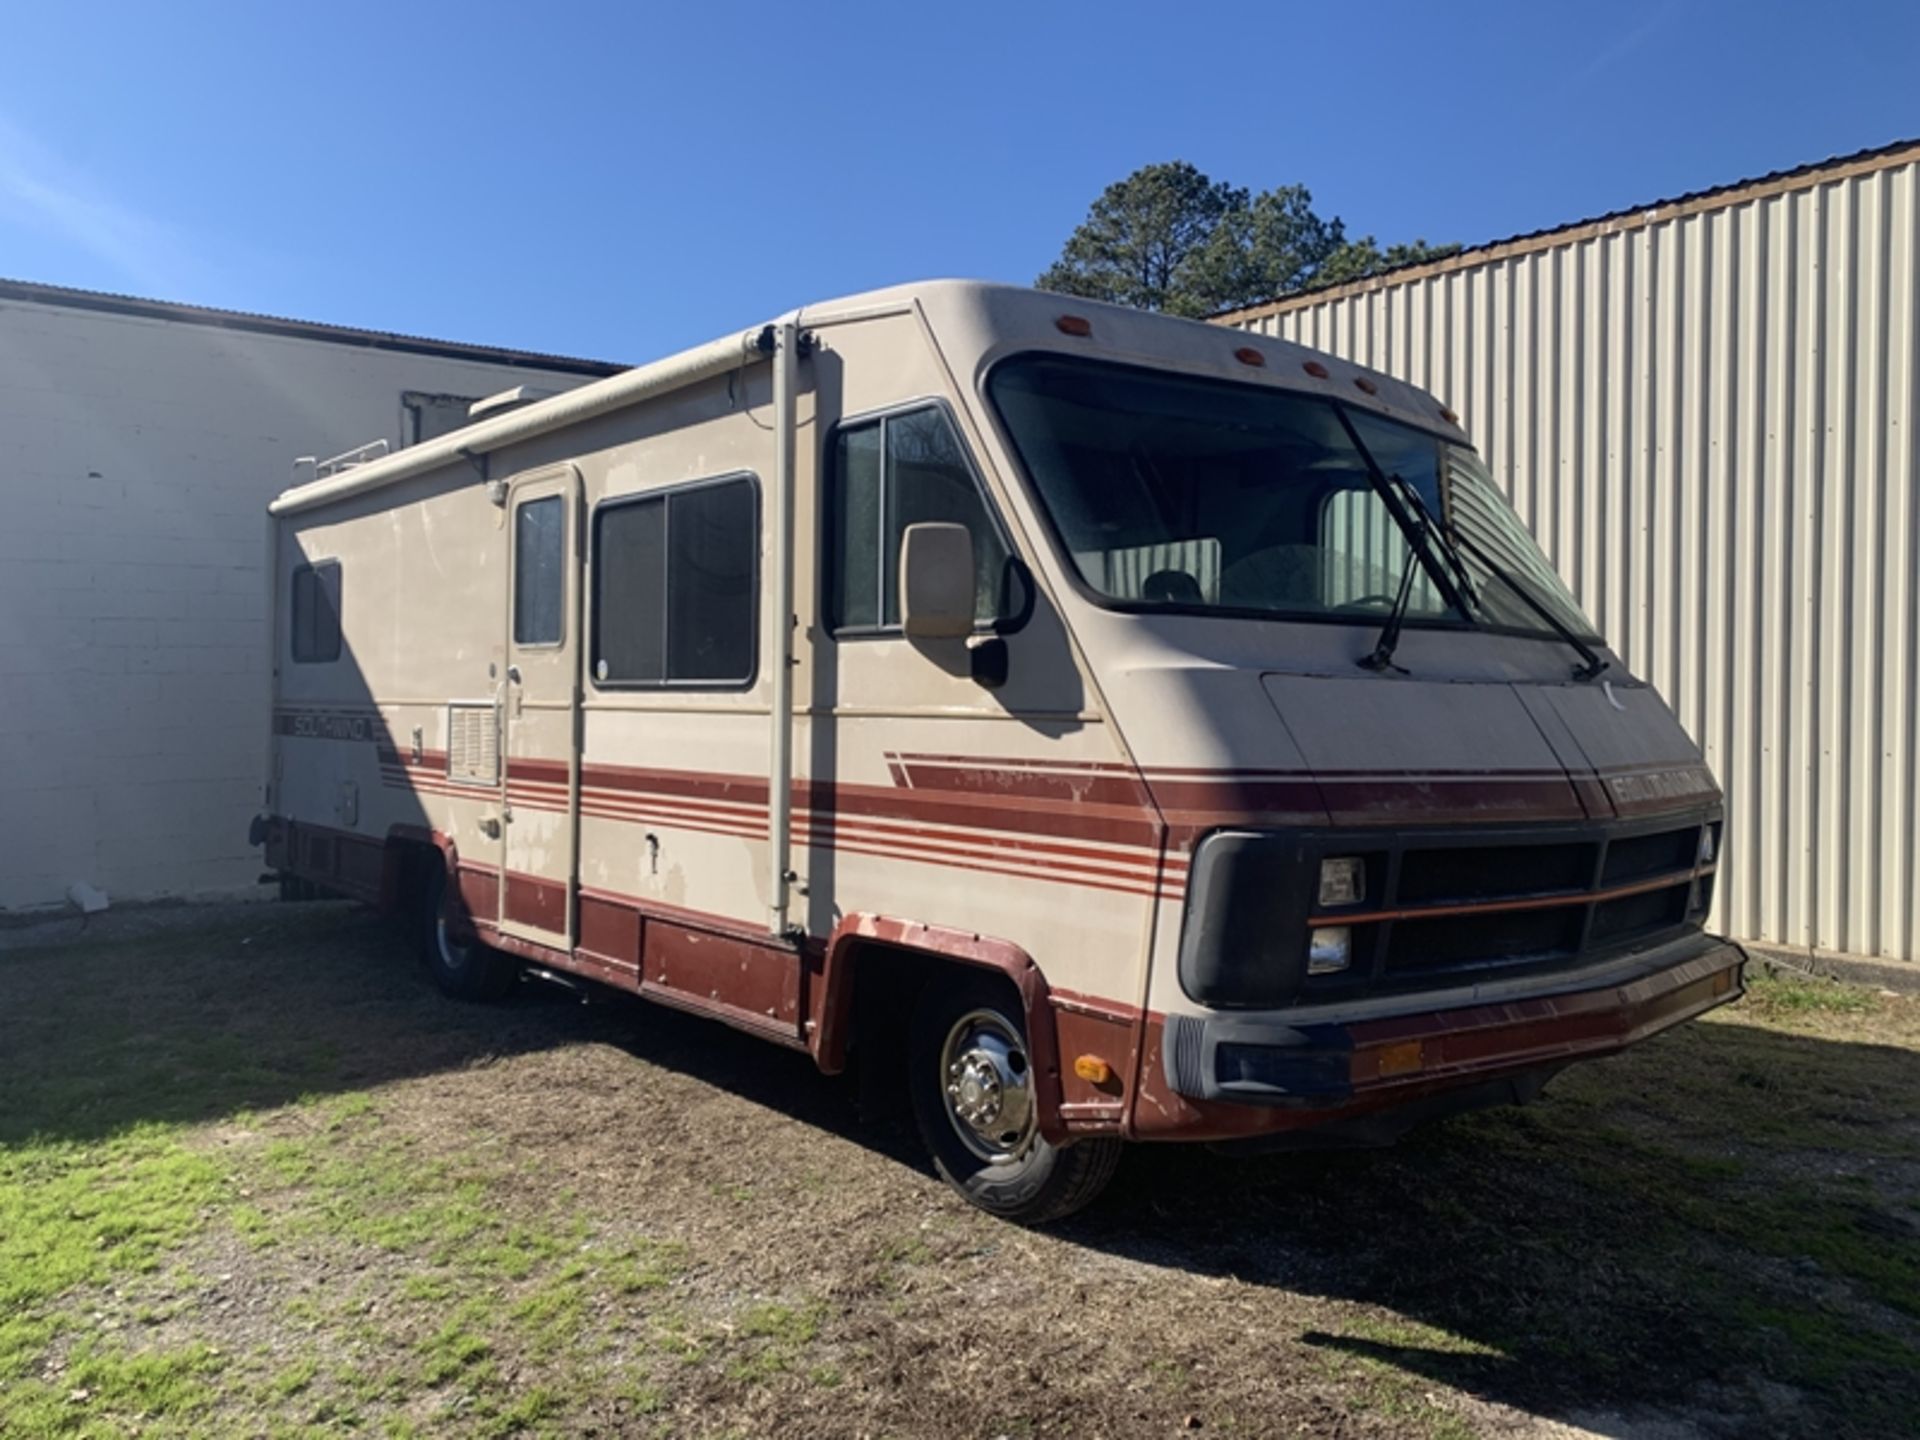 1987 FLEETWOOD Southwind motorhome - 72,271 miles showing - 1GBJP37W6H3301351 - Image 2 of 16